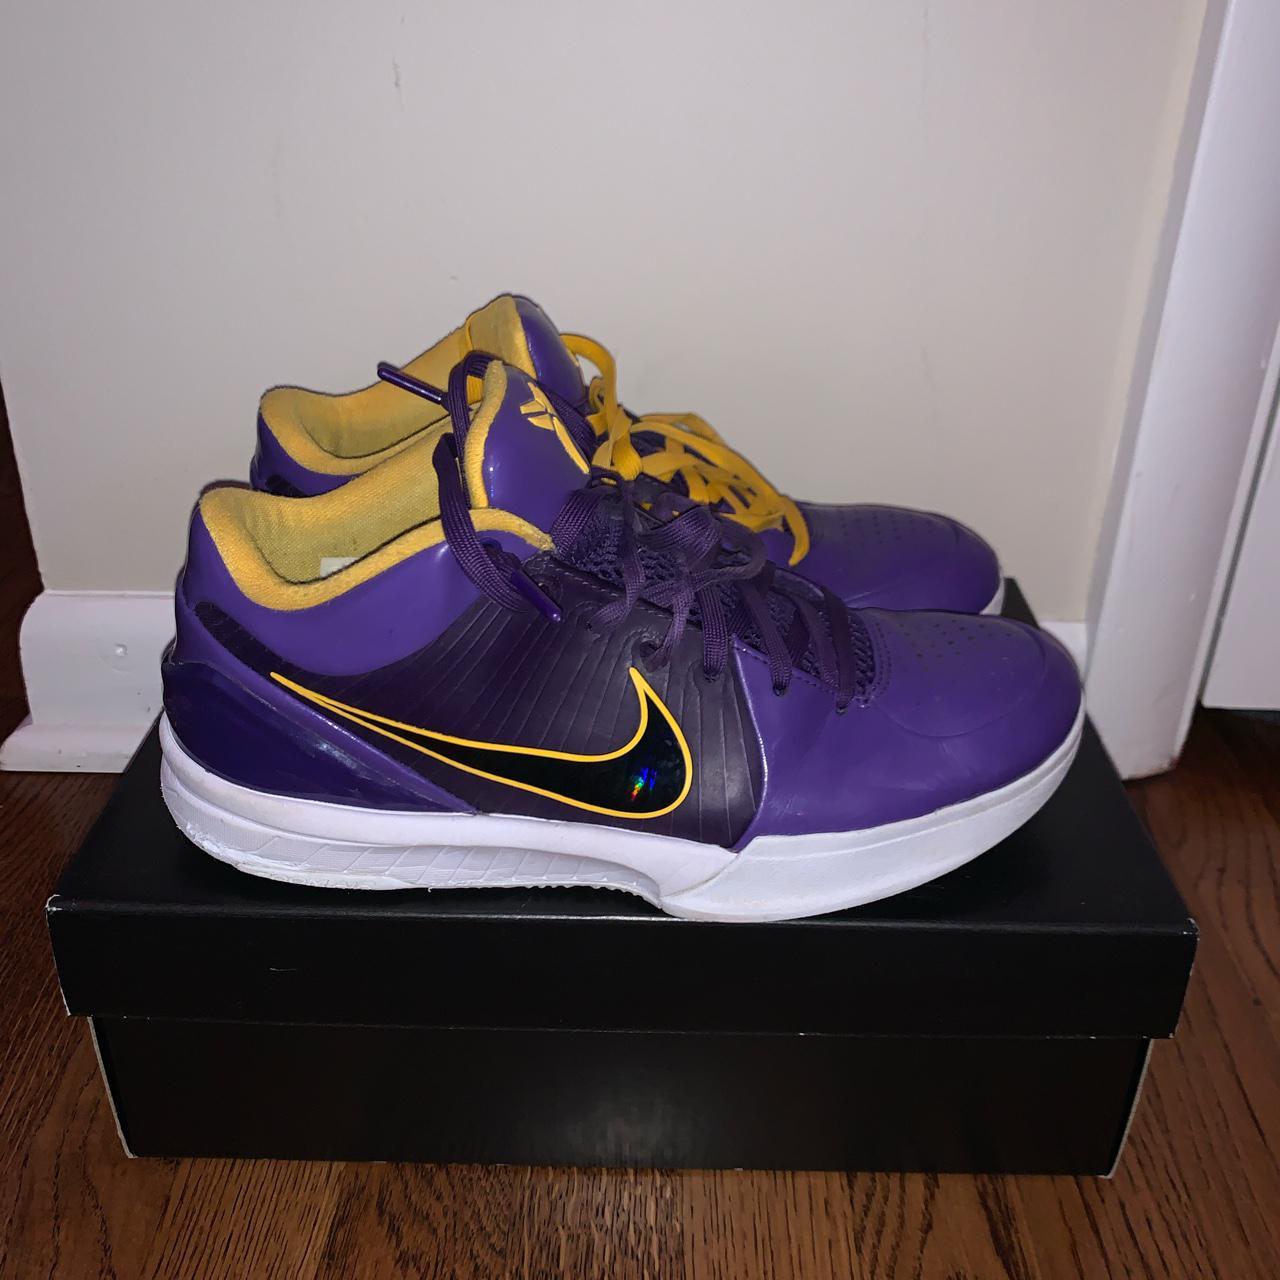 Nike Men's Yellow and Purple Trainers | Depop